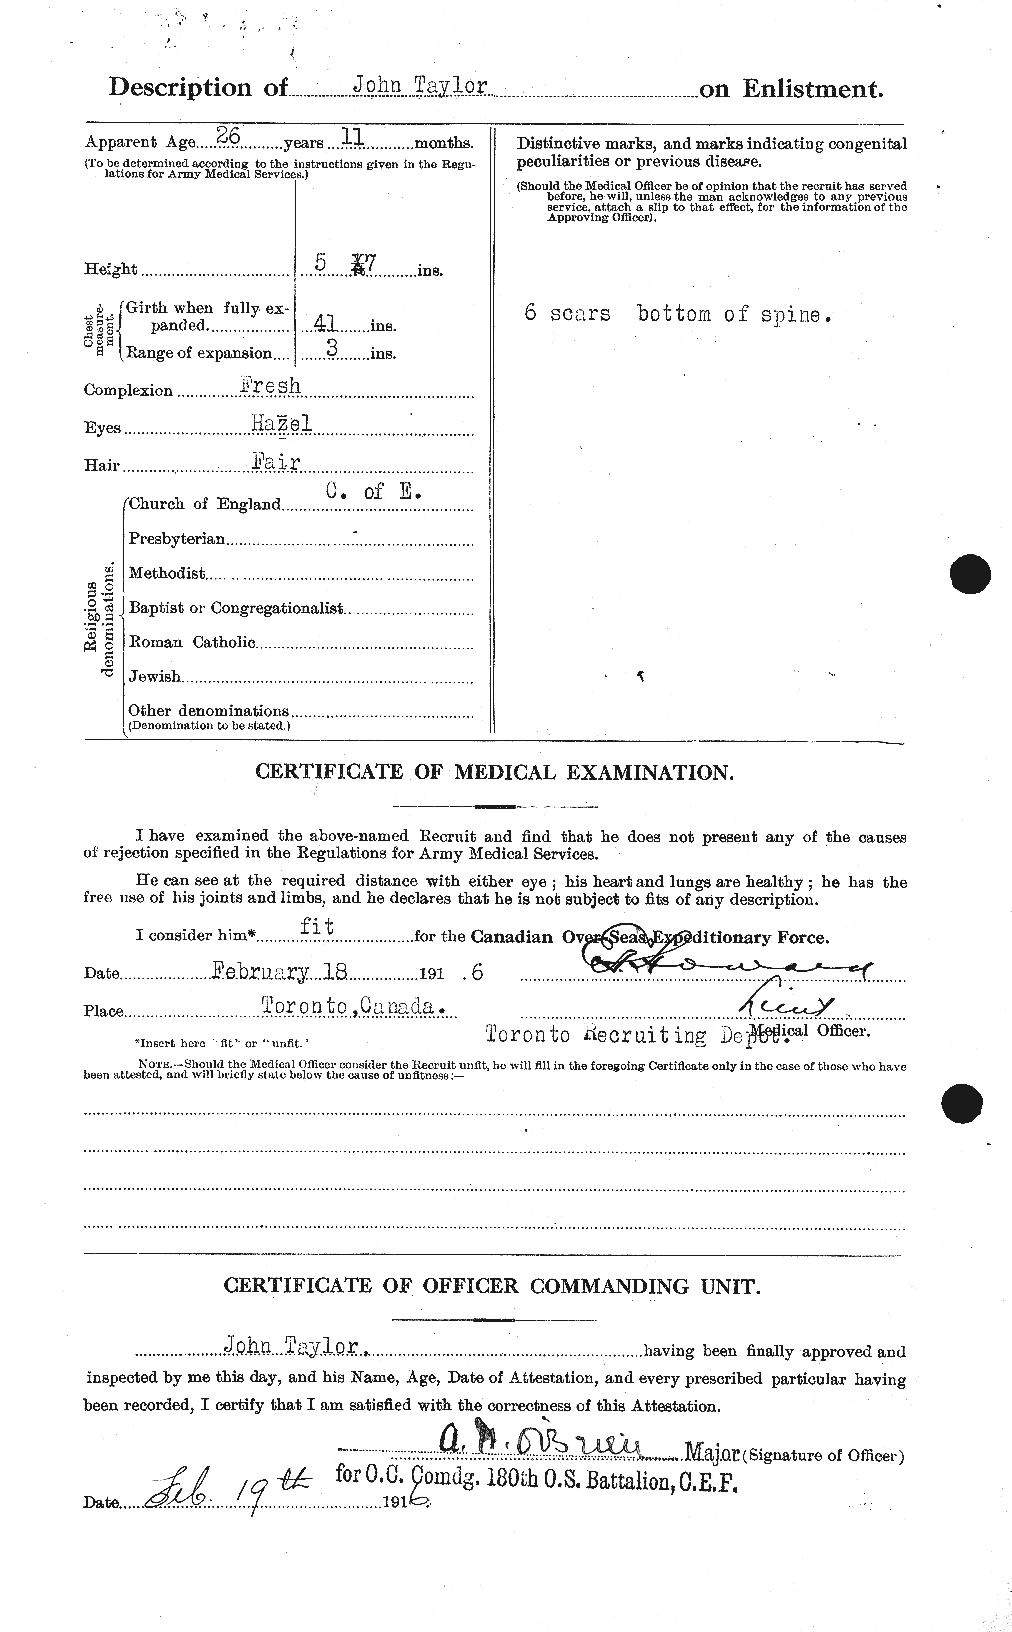 Personnel Records of the First World War - CEF 626984b